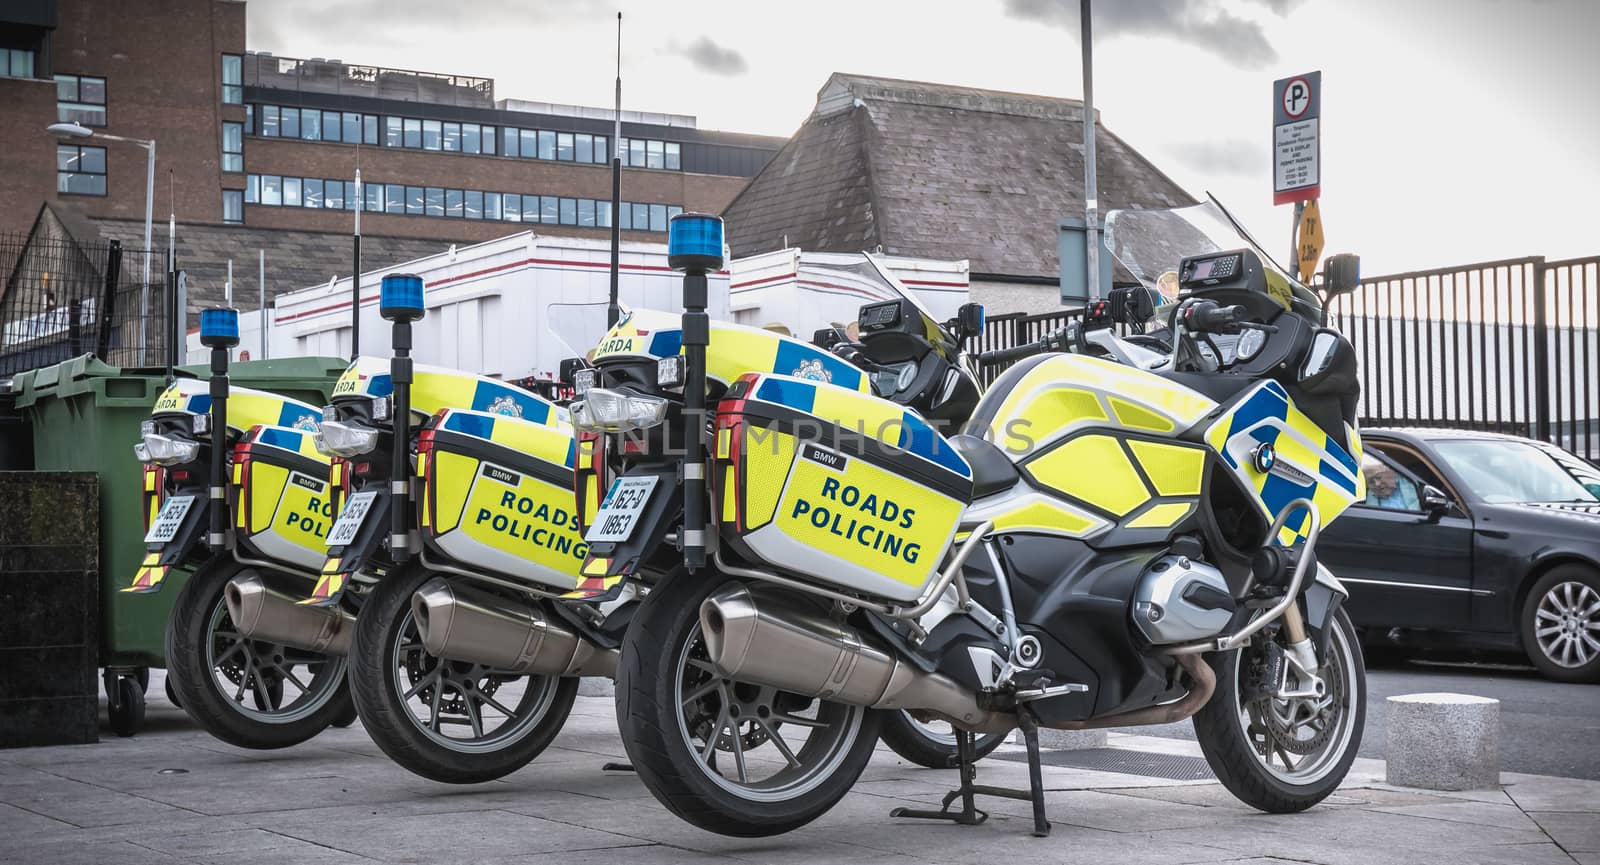 Irish Highway Police Motorcycle parked in Dublin by AtlanticEUROSTOXX